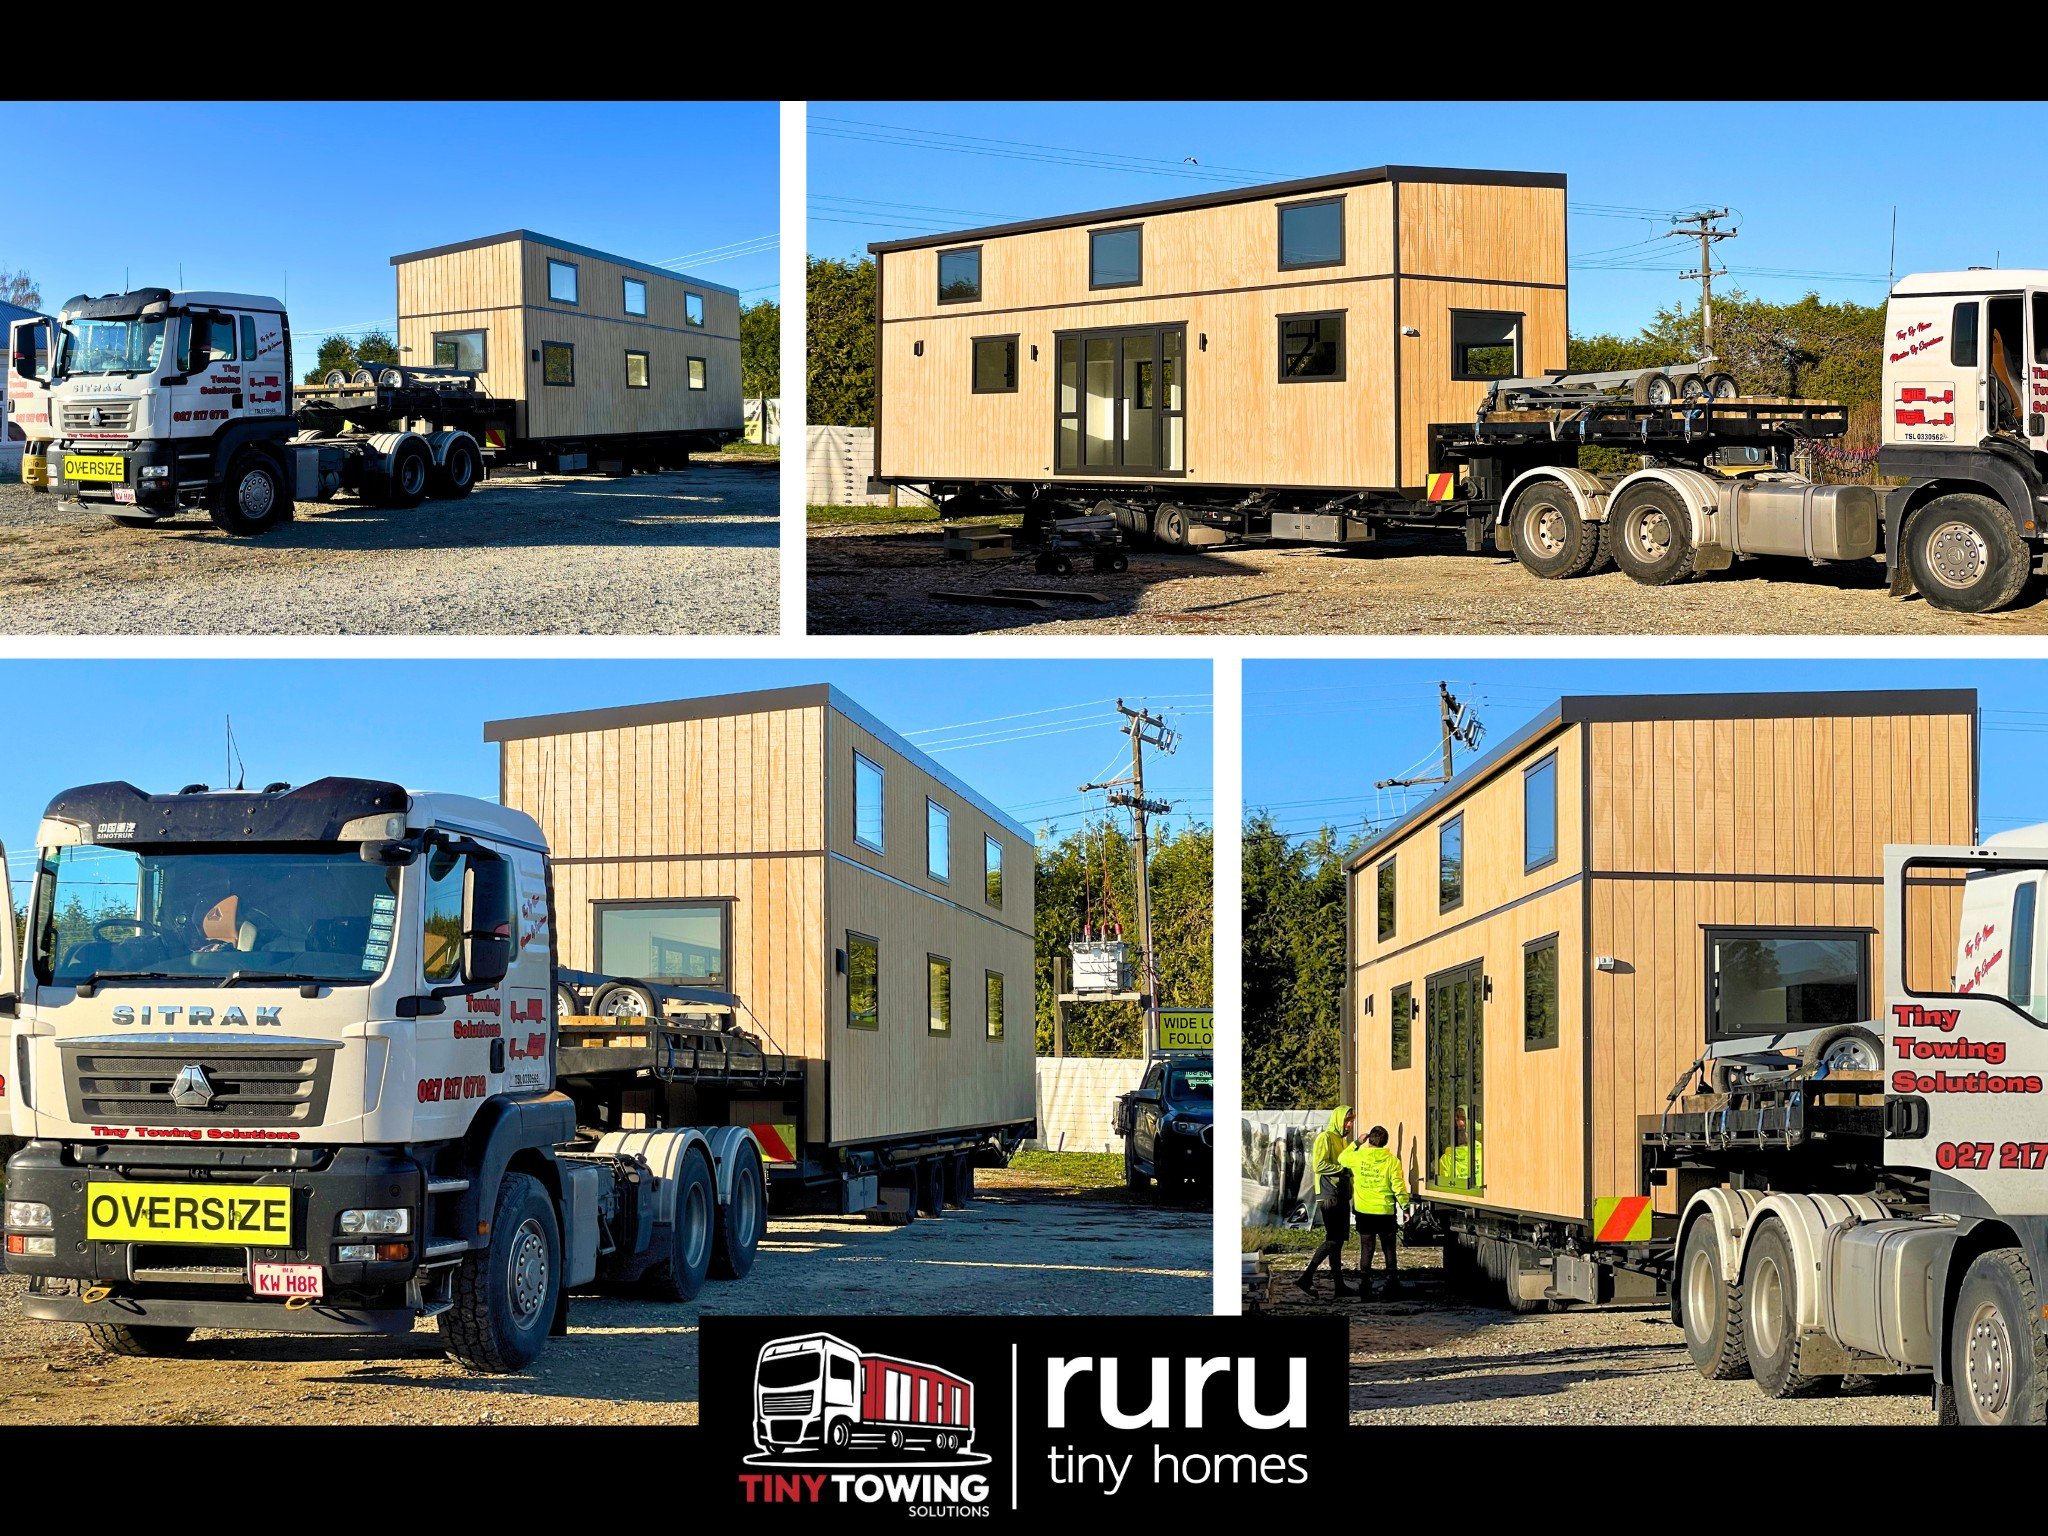 It&rsquo;s delivery day at our Motueka yard! 🚚 The highly skilled South Island team from @tinytowingsolutions has set out on their journey to Jack&rsquo;s Bay in the beautiful Otago region.

At ruru, we partner with trusted transportation companies 